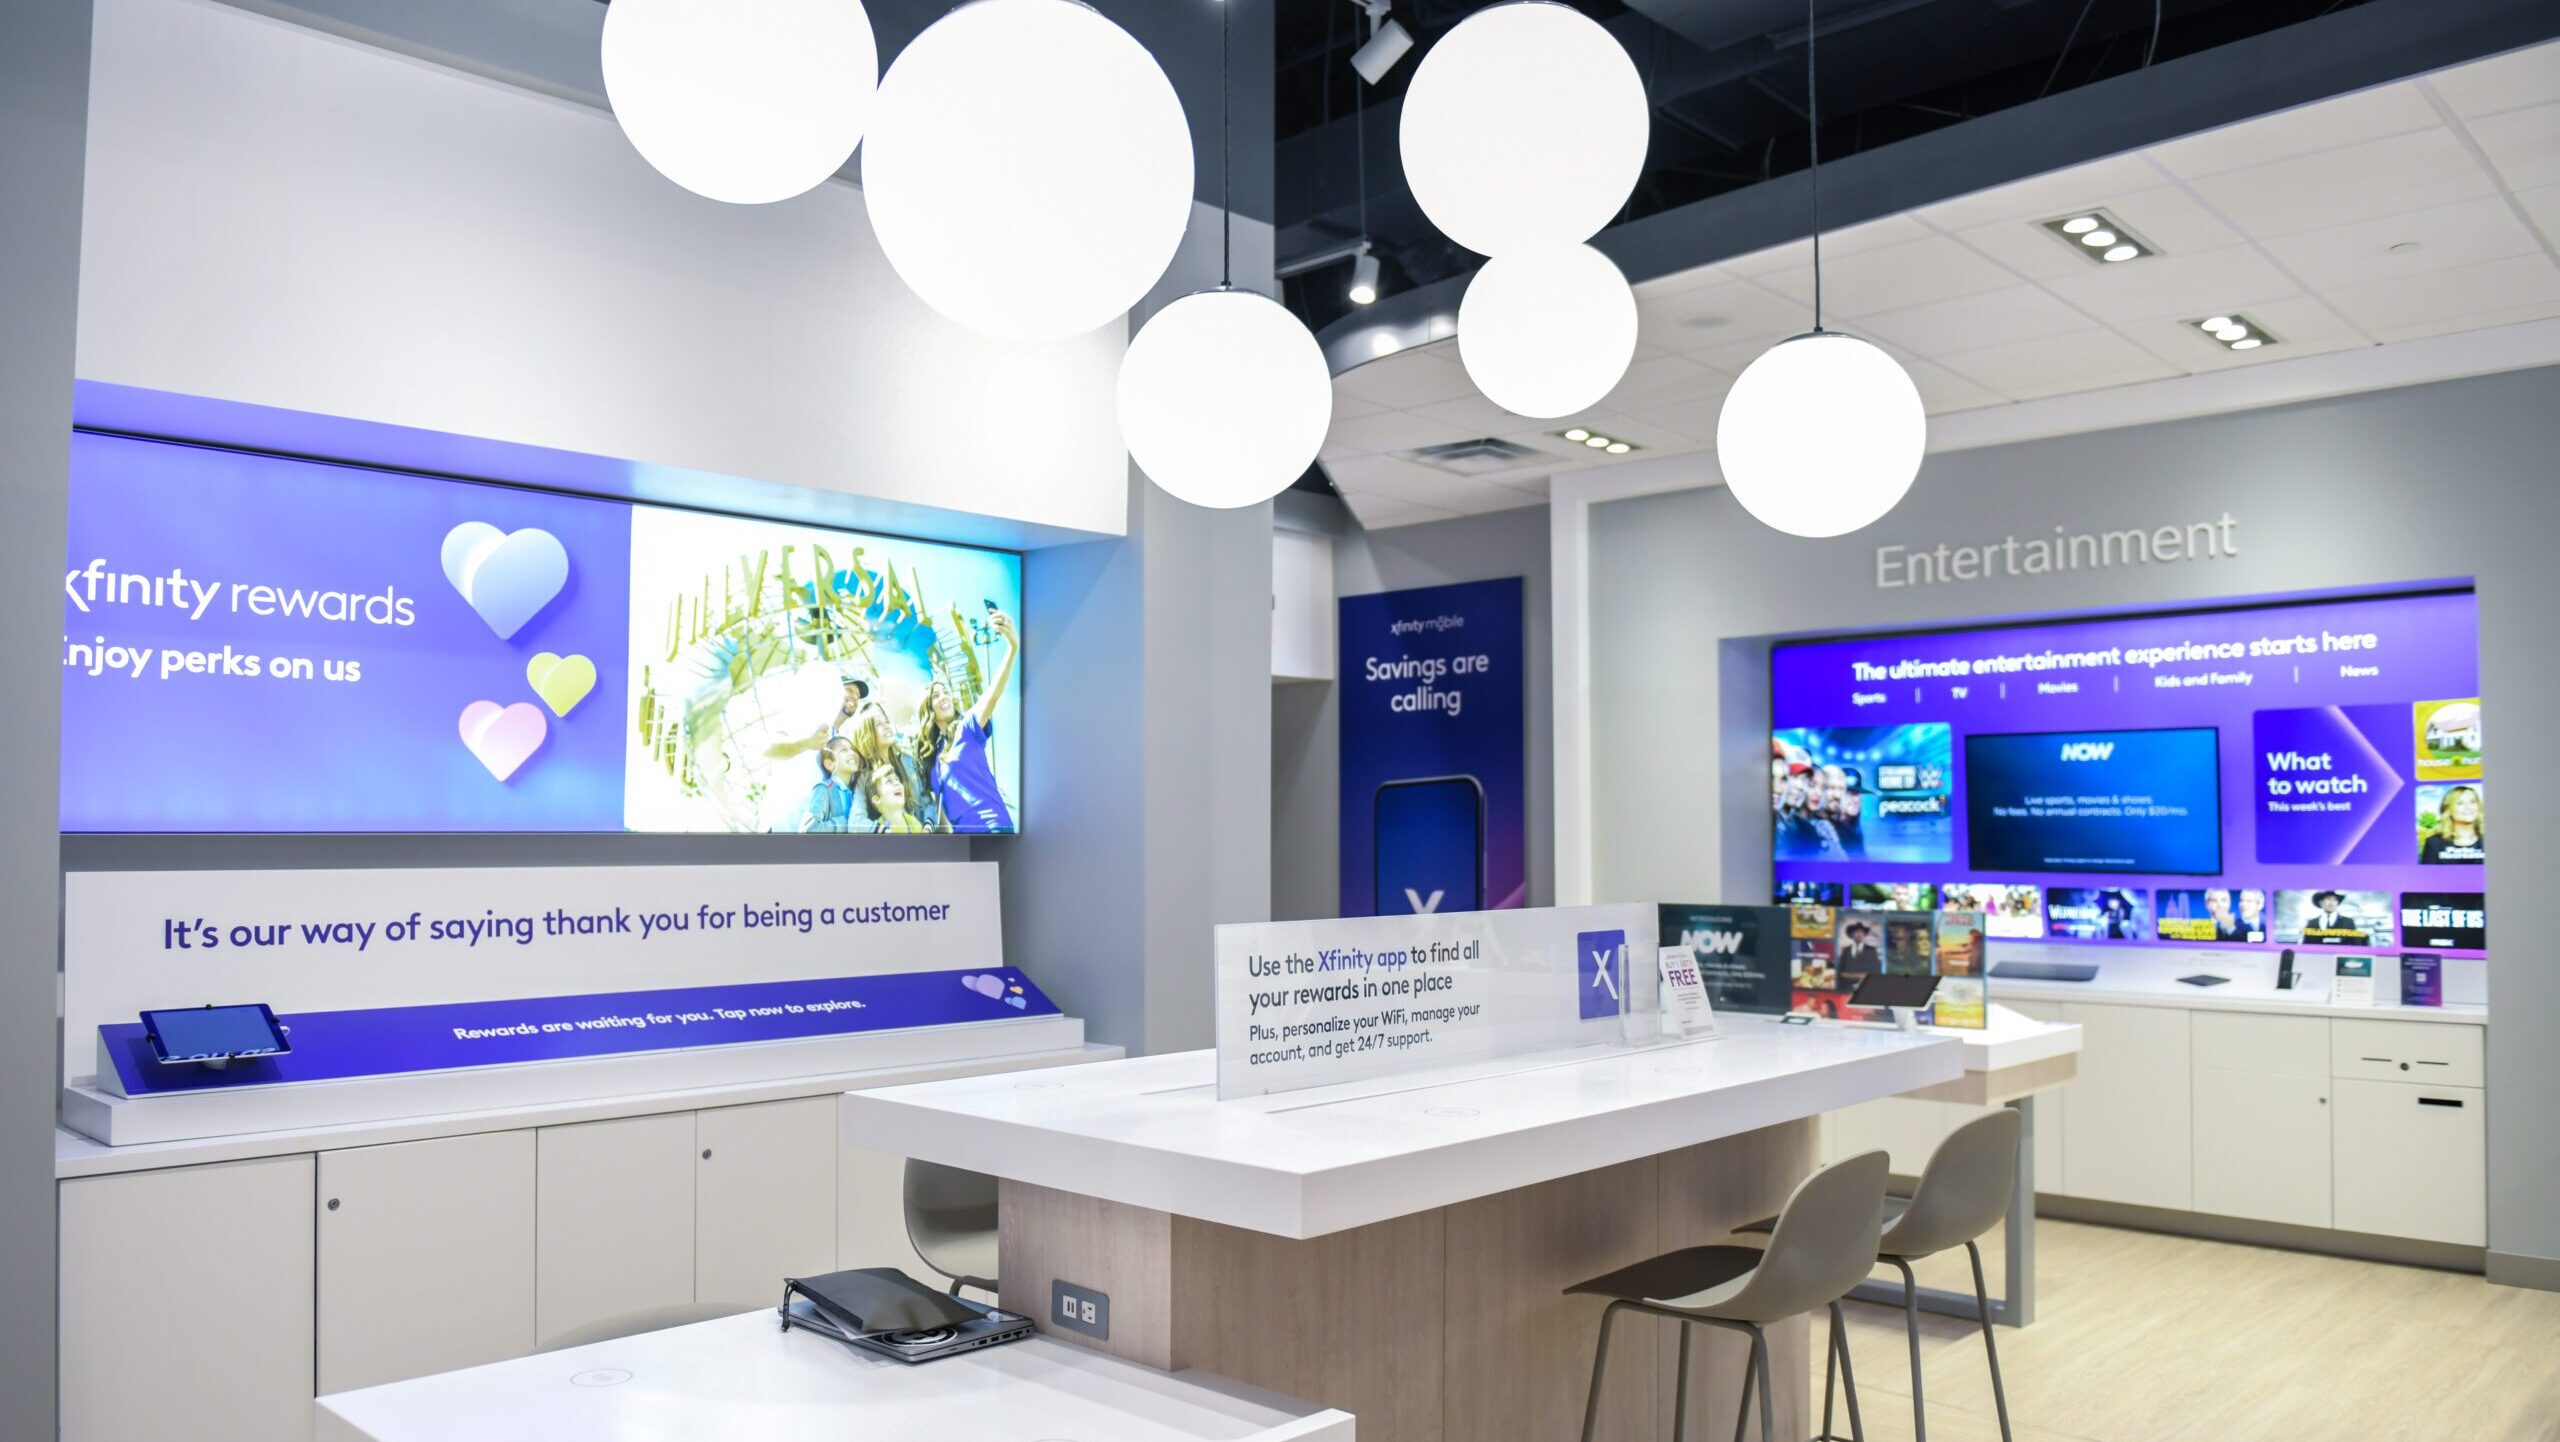 Comcast Announces Completion of $22 Million in Technology Infrastructure Projects in Sarasota County and Celebrates Xfinity Store Grand Opening